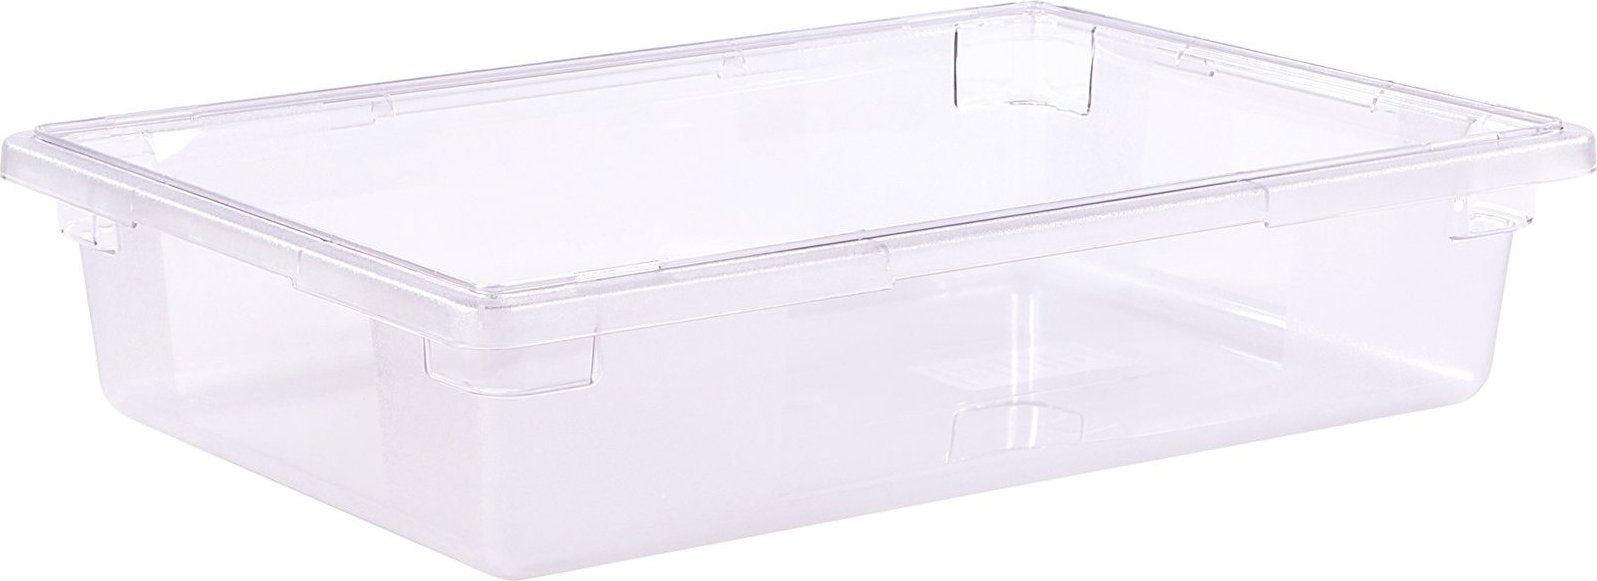 Omcan - 18" x 26" x 6" Polycarbonate Food Storage Container (457 x 660 x 152 mm), 4/cs - 85119